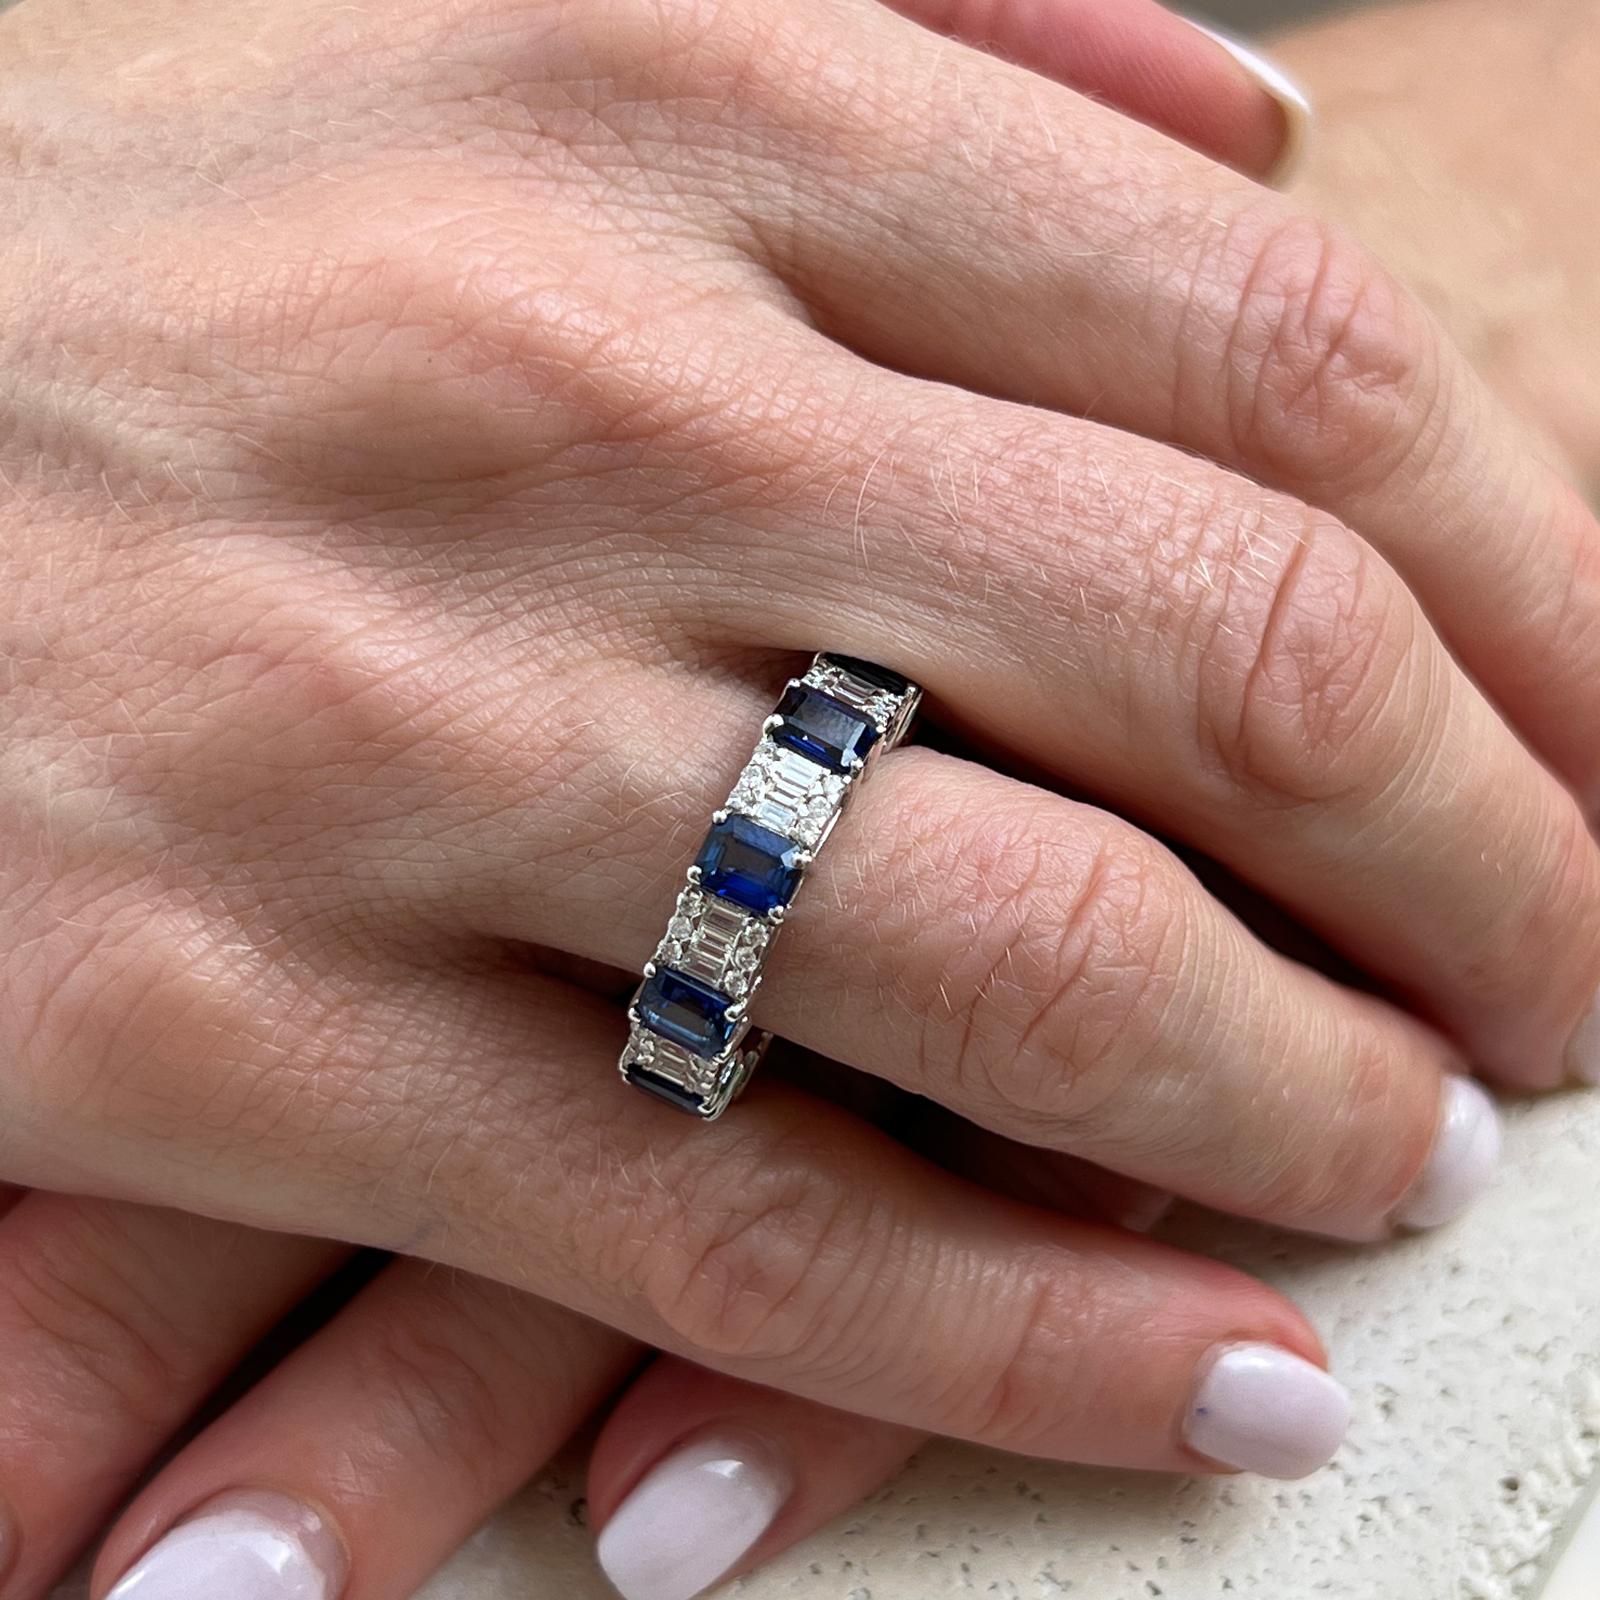 Beautiful diamond and sapphire eternity band crafted in 18 karat white gold. The band features rectangular cut natural sapphires weighing 4.50 CTW. The sapphires alternate with round brilliant and baguette shape diamonds weighing approximately 1.00